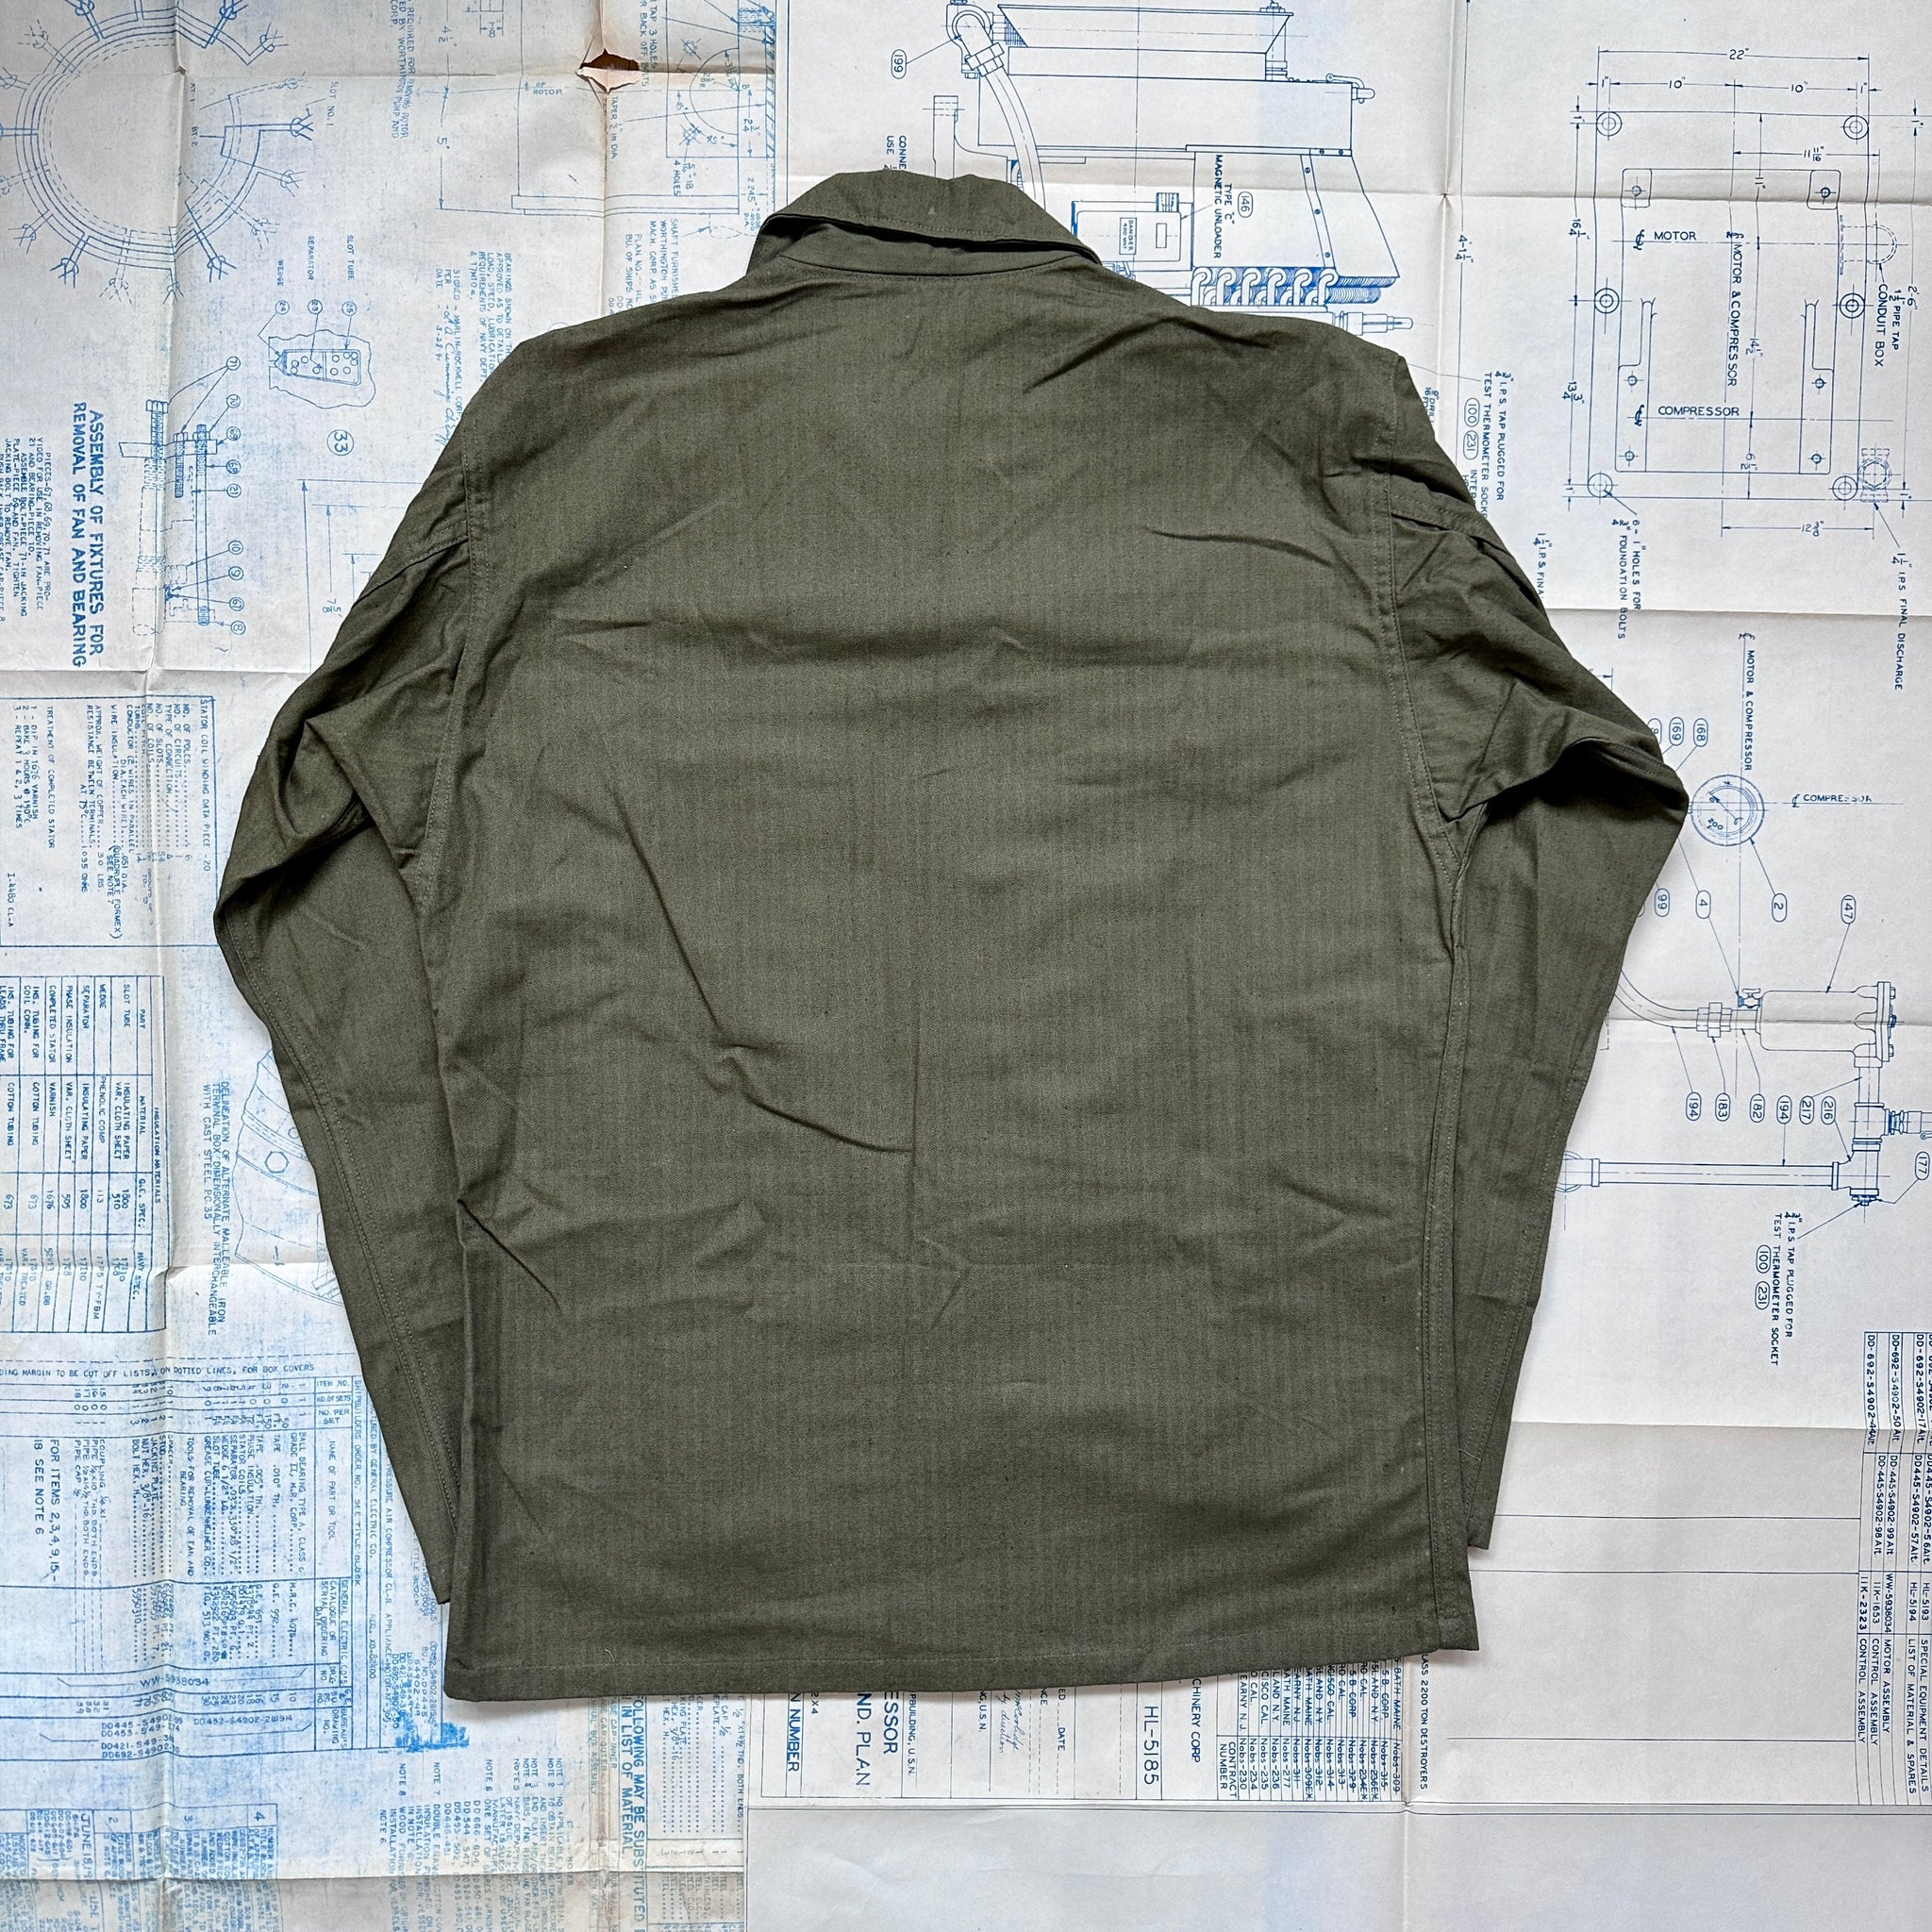 US Army M47 HBT Shirt Deadstock – The Major's Tailor